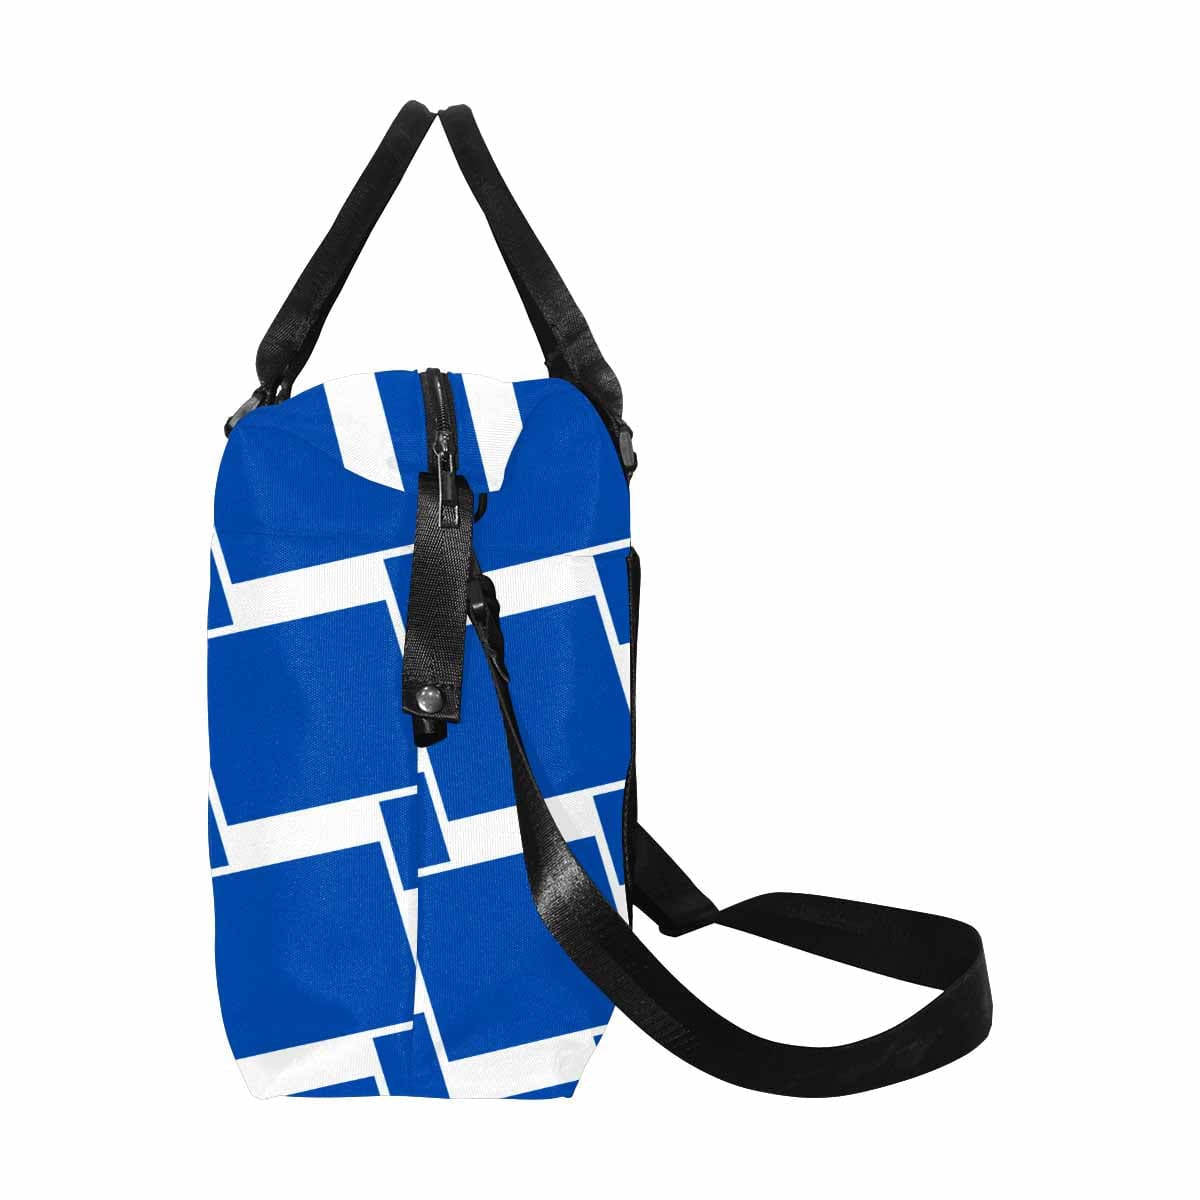 Duffle Bag - Large Capacity - Royal Blue - Bags | Travel Bags | Canvas Carry